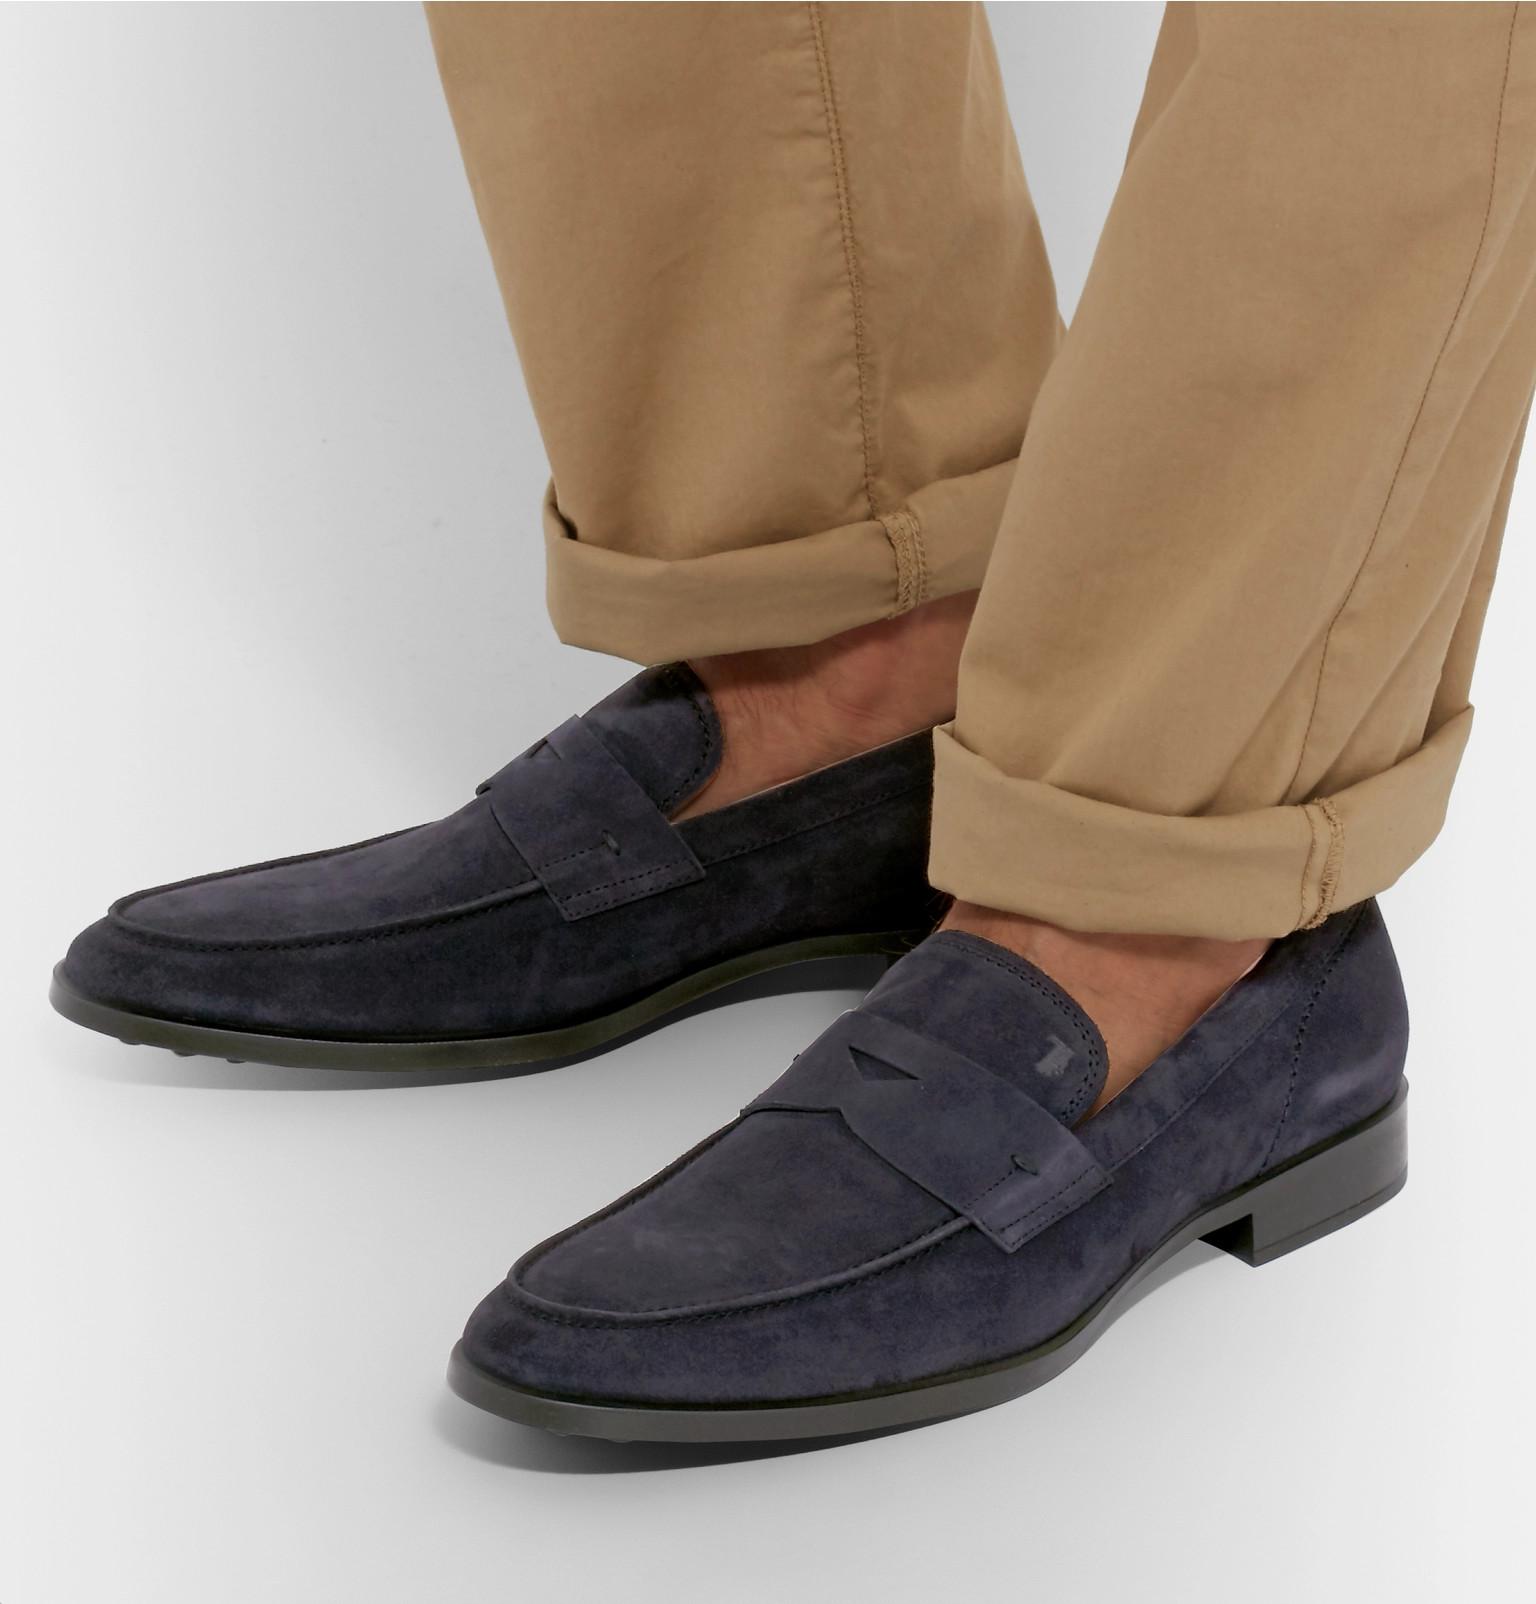 Tod's Suede Penny Loafers in Navy (Blue) for Men - Lyst